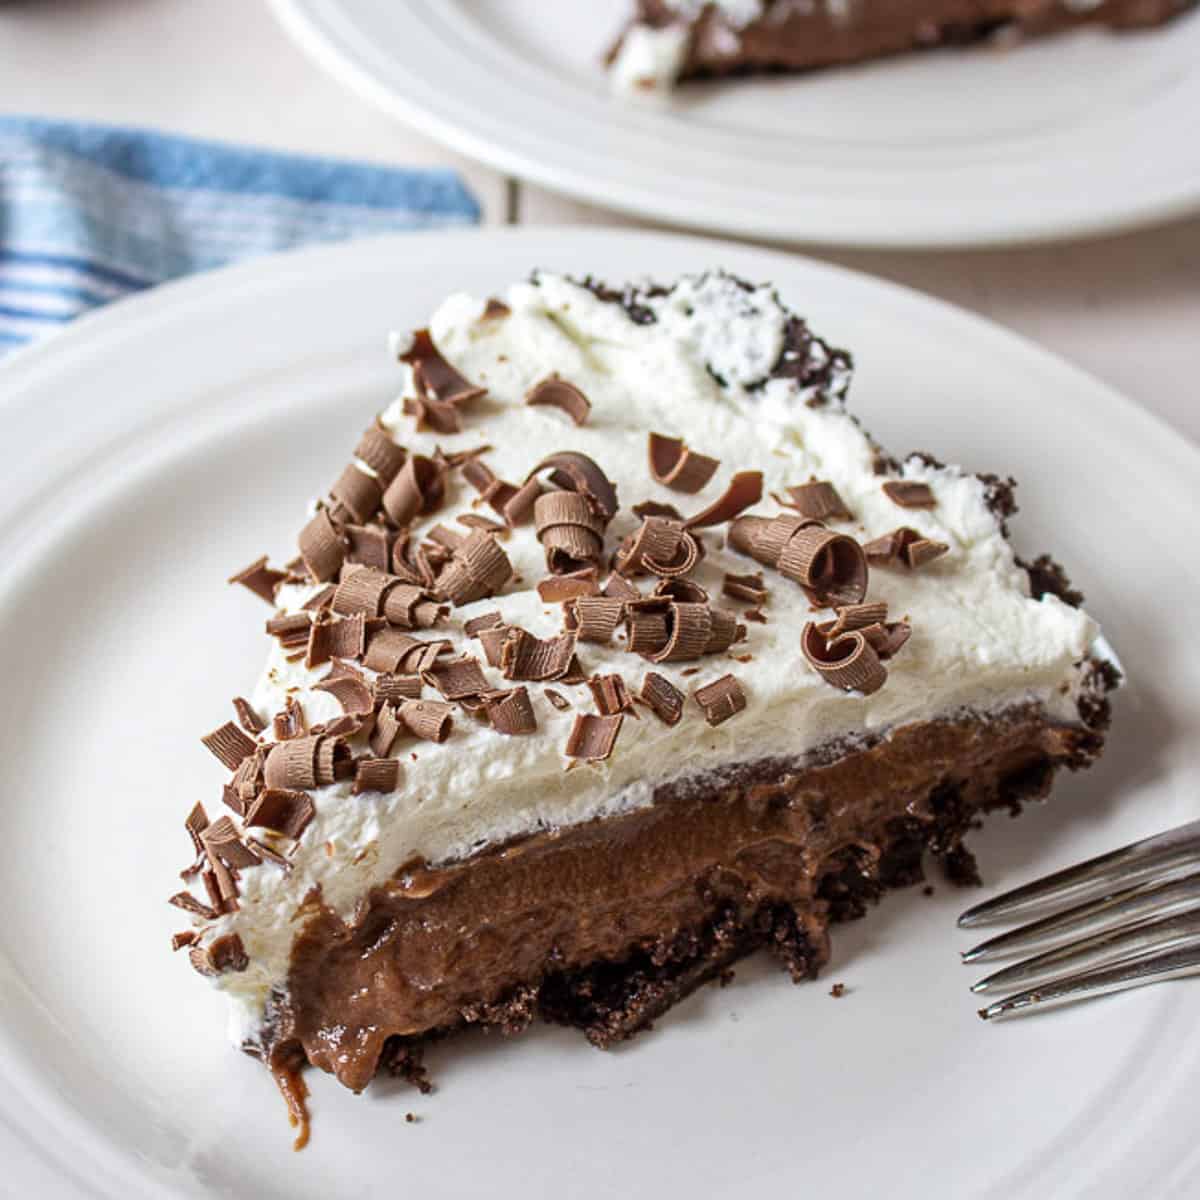 A slice of chocolate pie topped with whipped cream and chocolate shavings.